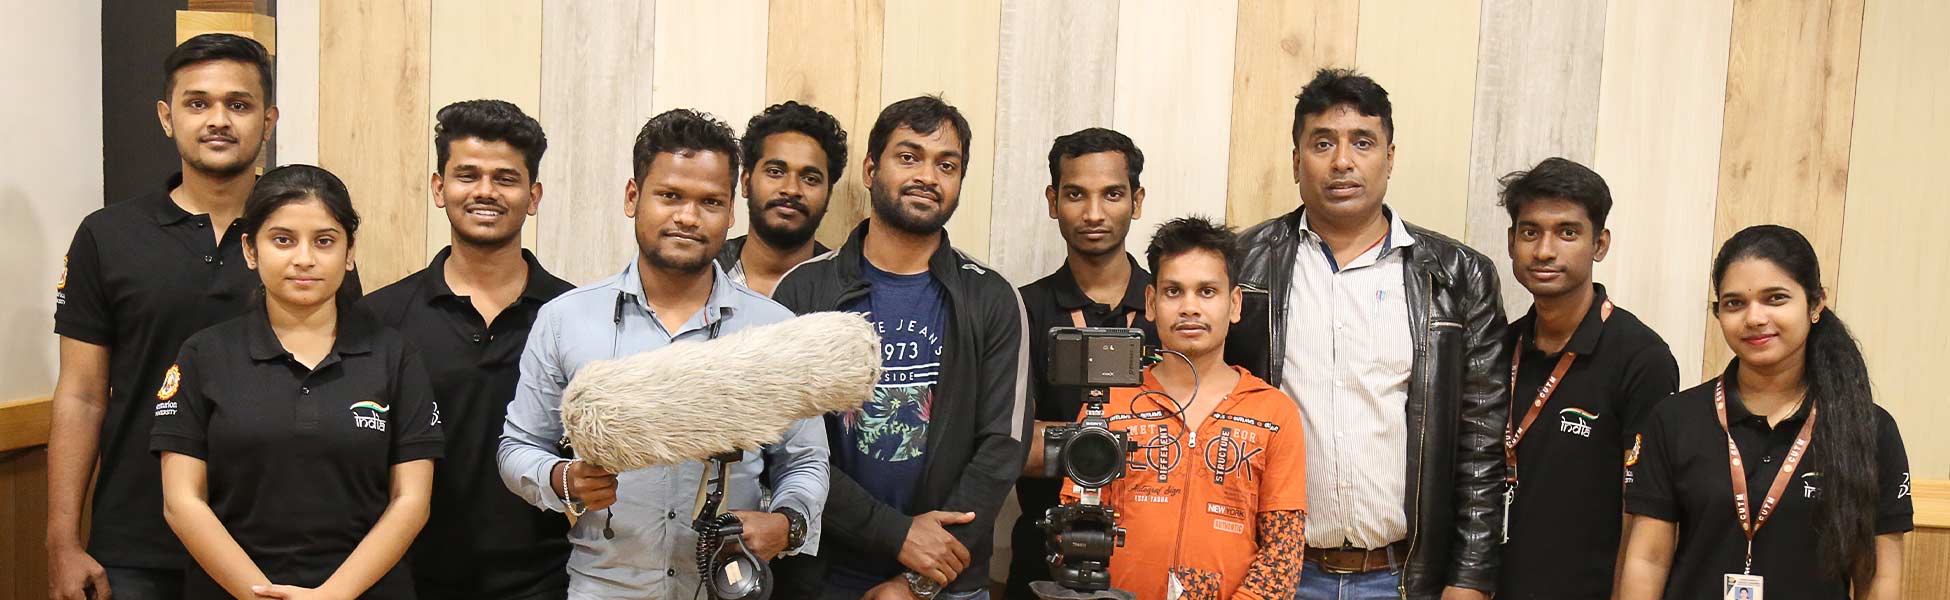 film production services in noida, video production services in noida, tv production services in noida, production services in noida